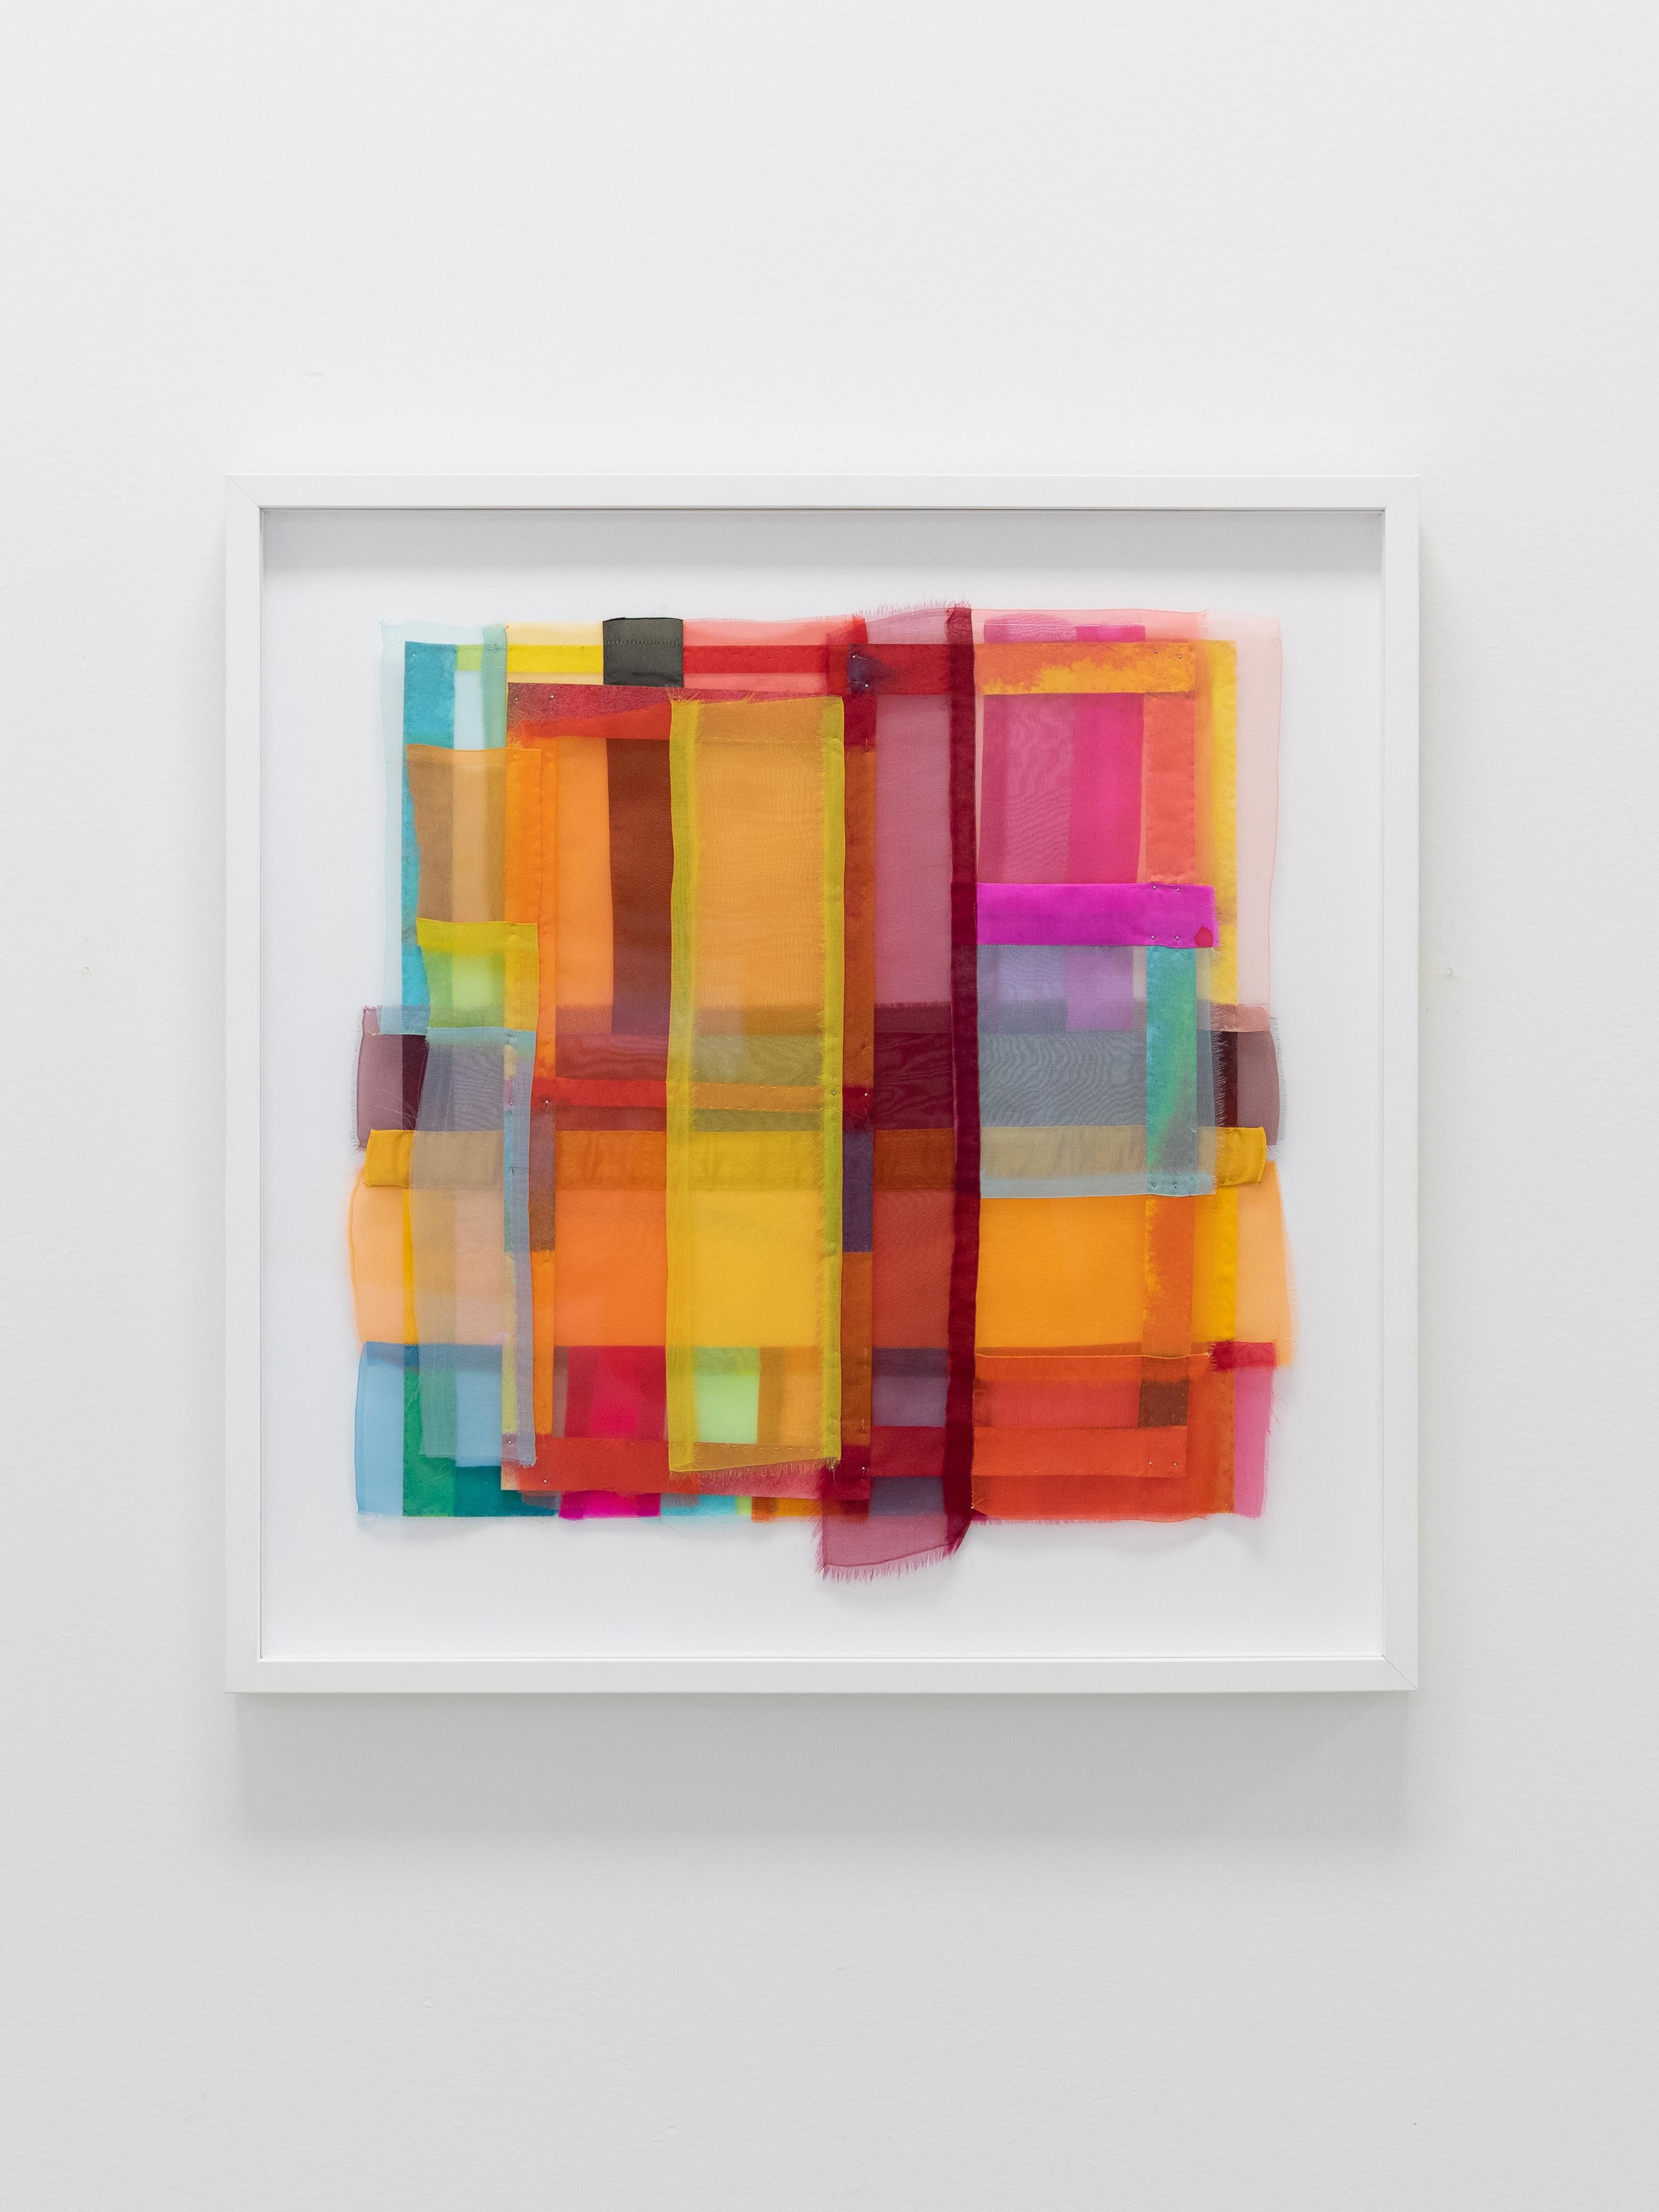 Untitled (0399), colorful, abstract collage  - Sculpture by Linda Schmidt